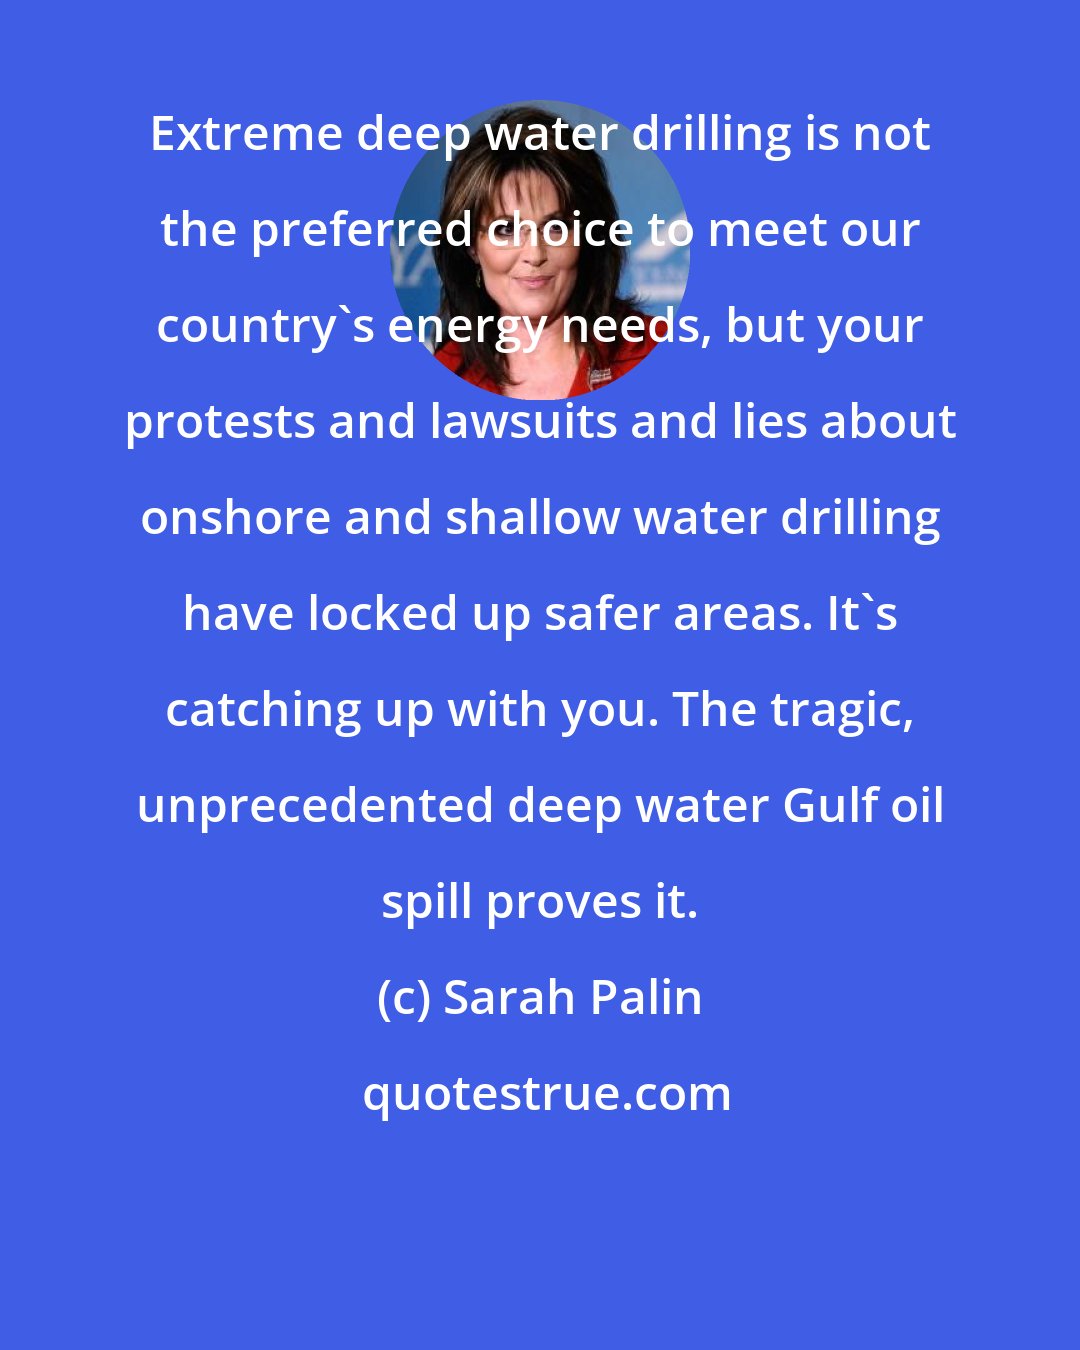 Sarah Palin: Extreme deep water drilling is not the preferred choice to meet our country's energy needs, but your protests and lawsuits and lies about onshore and shallow water drilling have locked up safer areas. It's catching up with you. The tragic, unprecedented deep water Gulf oil spill proves it.